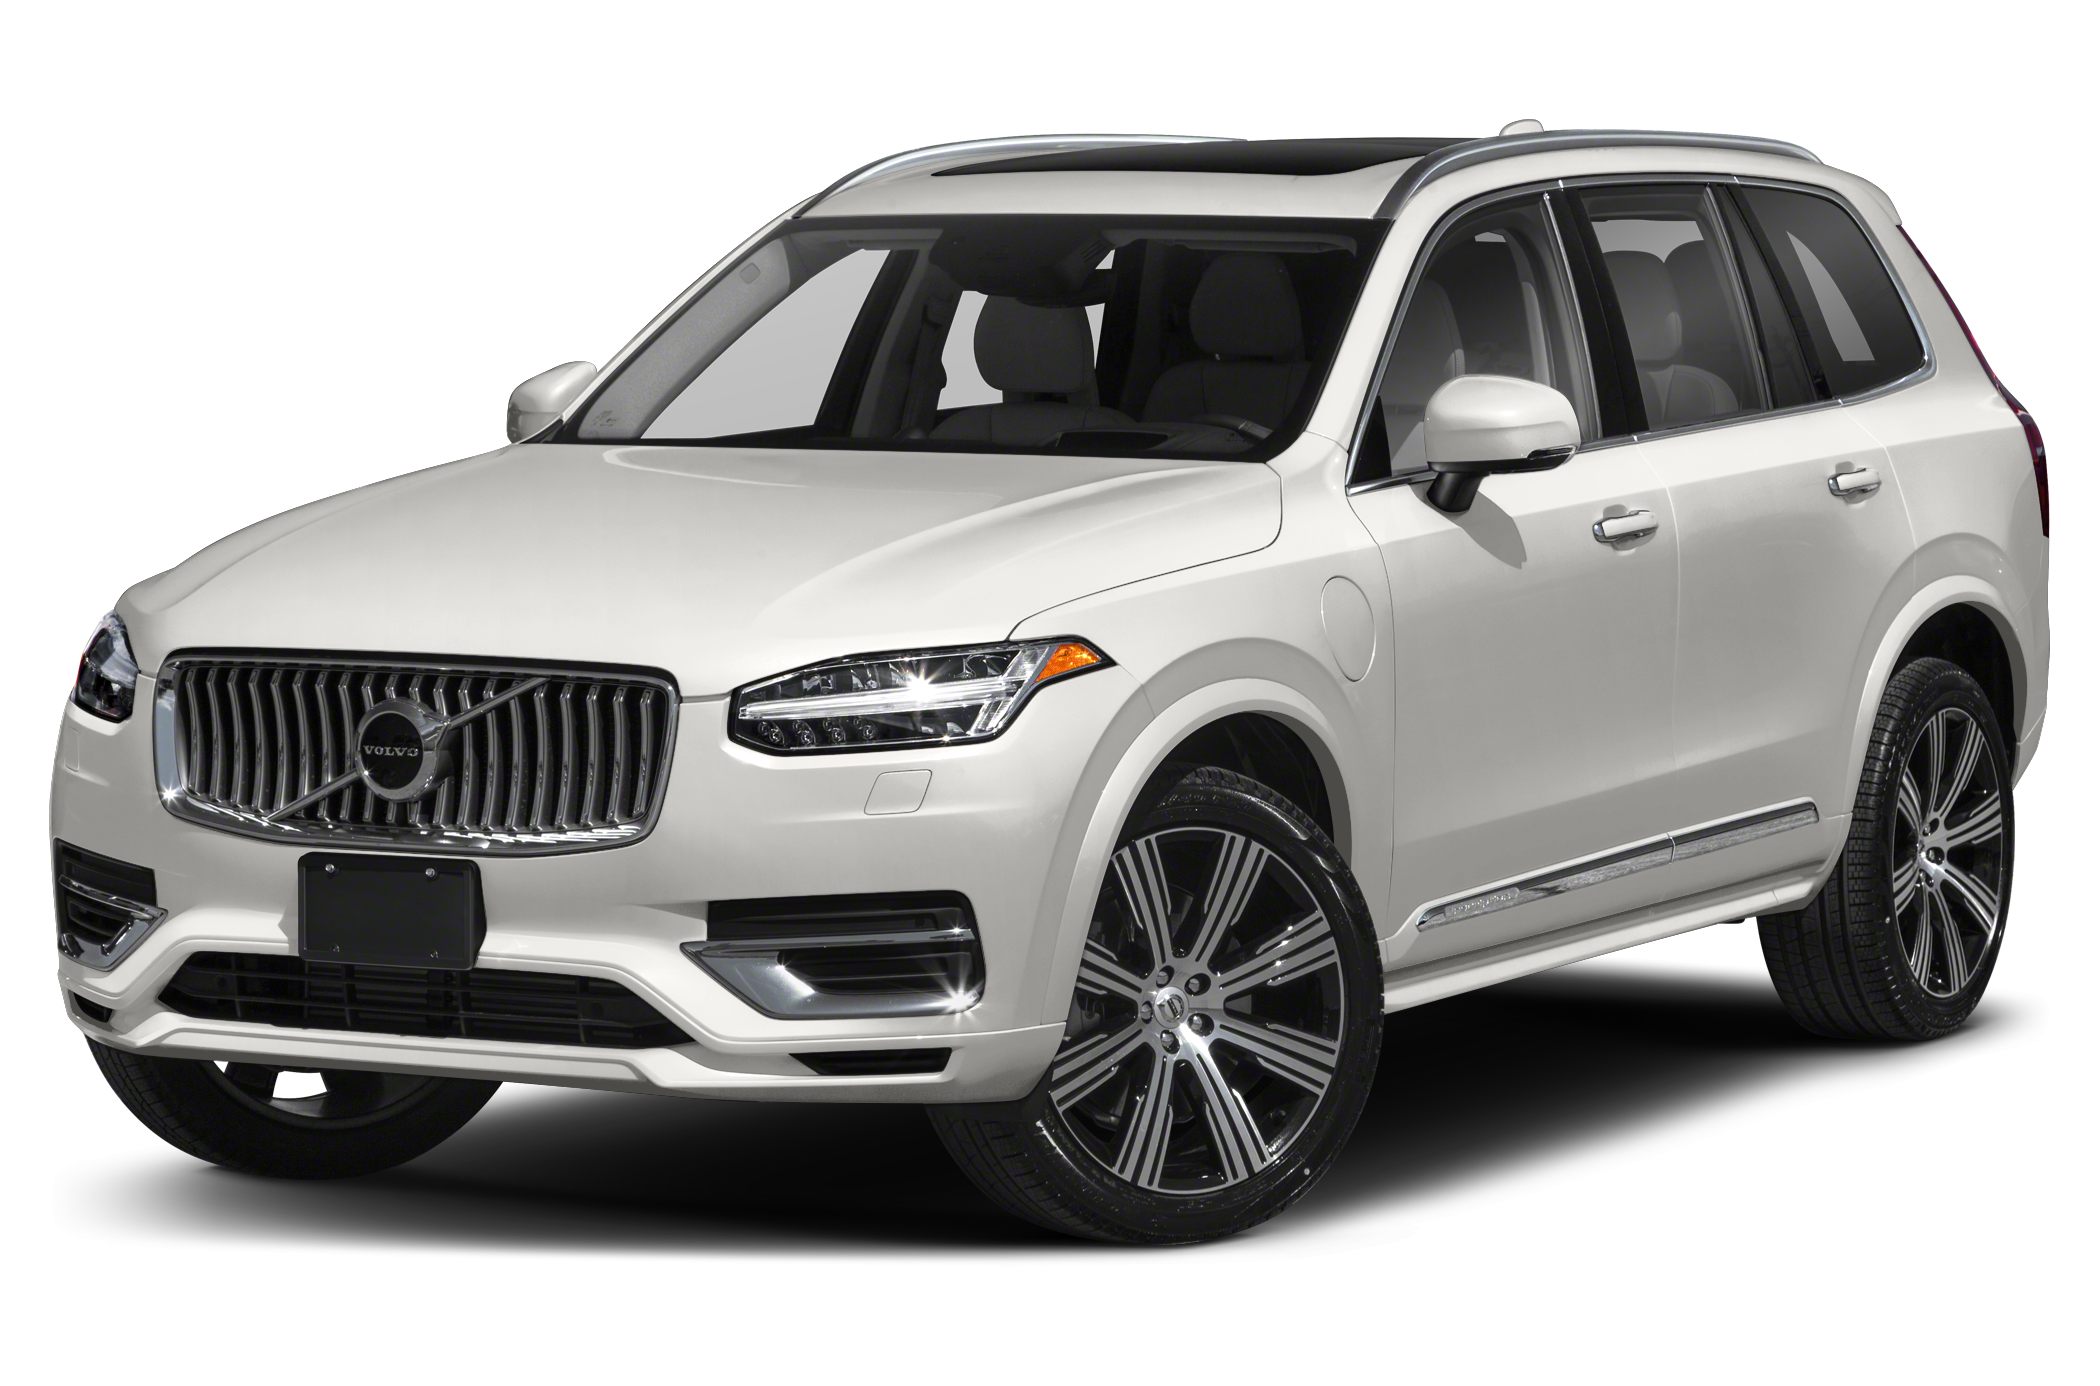 2020 Volvo XC90 T8 Inscription First Drive Review ...